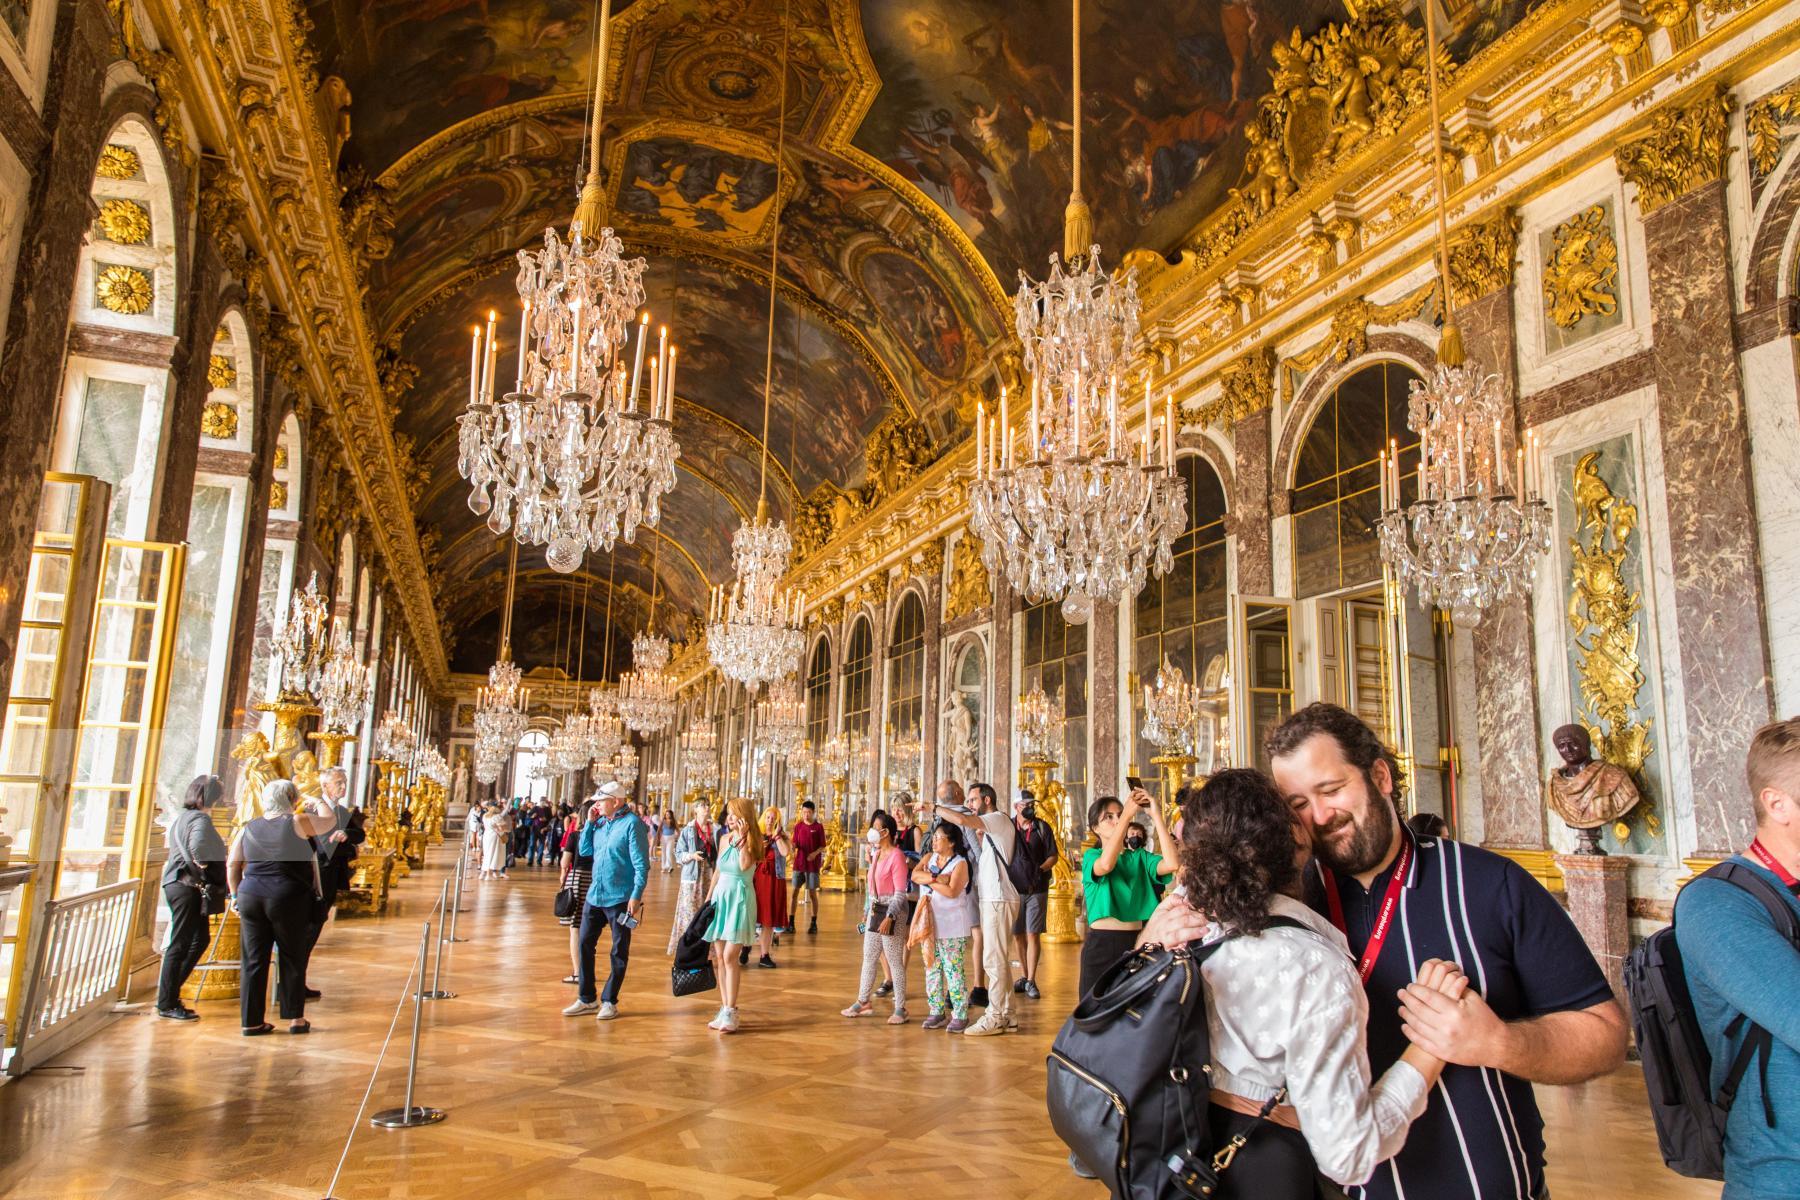 Purchase Dancing in the Palace of Versailles by Katie Linsky Shaw